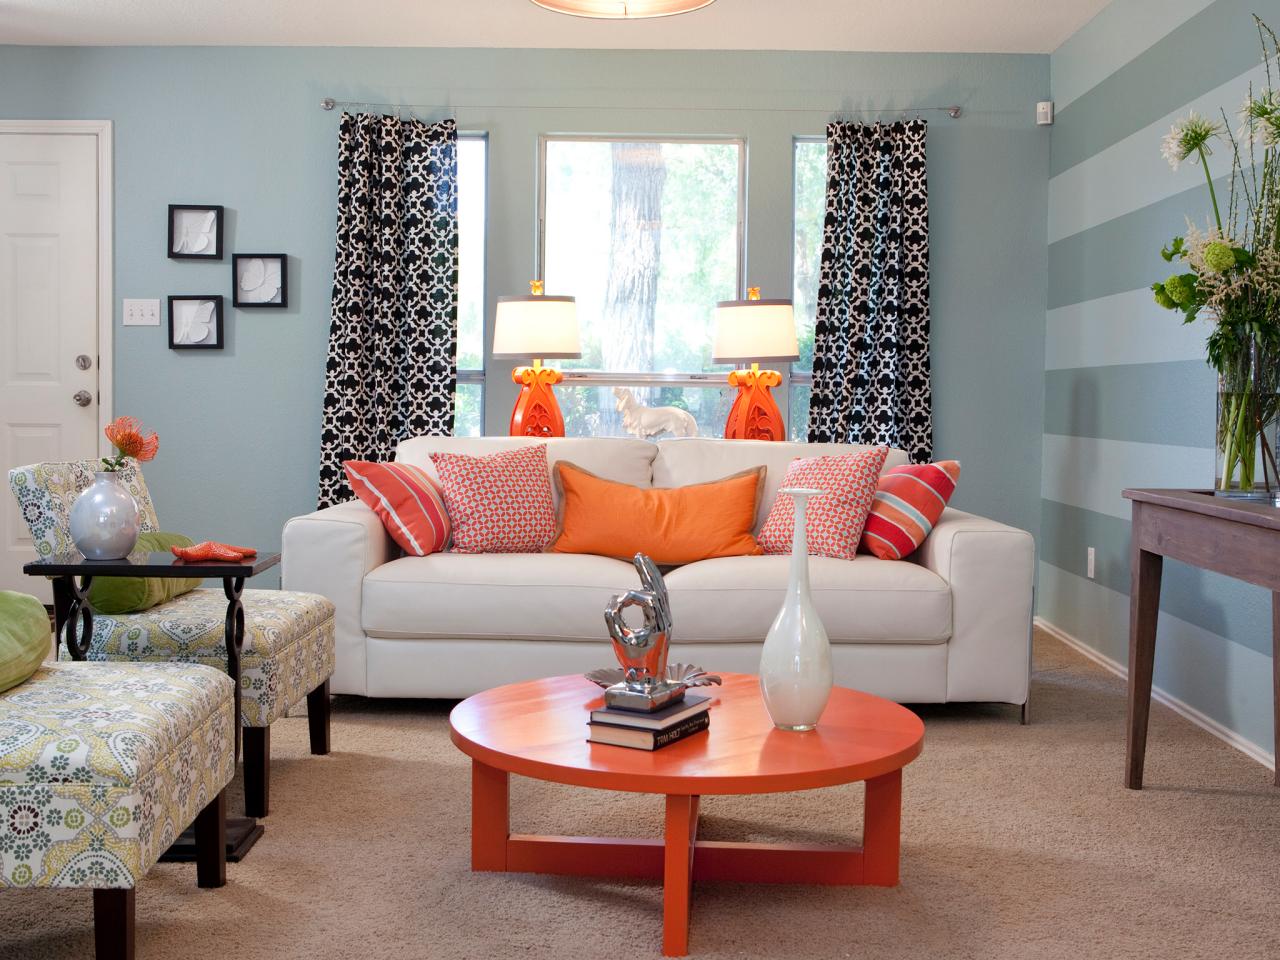 Blue Transitional Living Room With Orange Accents Hgtv